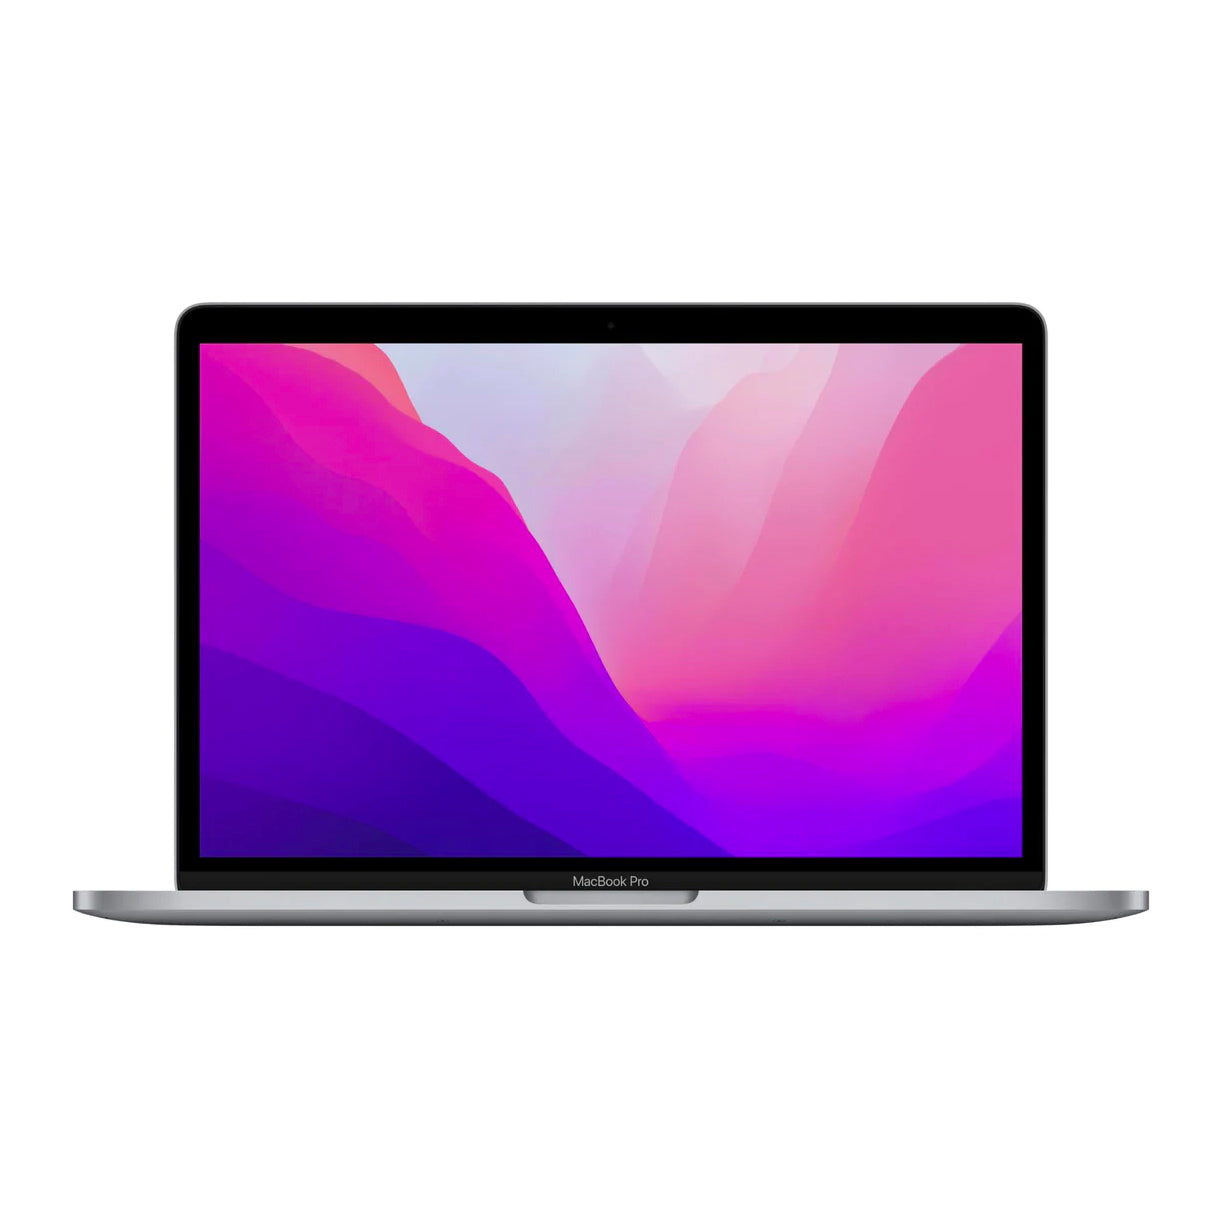 NEW Apple Macbook Pro with M1 Chip 13 Inch Laptop 2020 Model ( 8GB, 512GB  SSD) MYD92LL/A | With Apple International Warranty